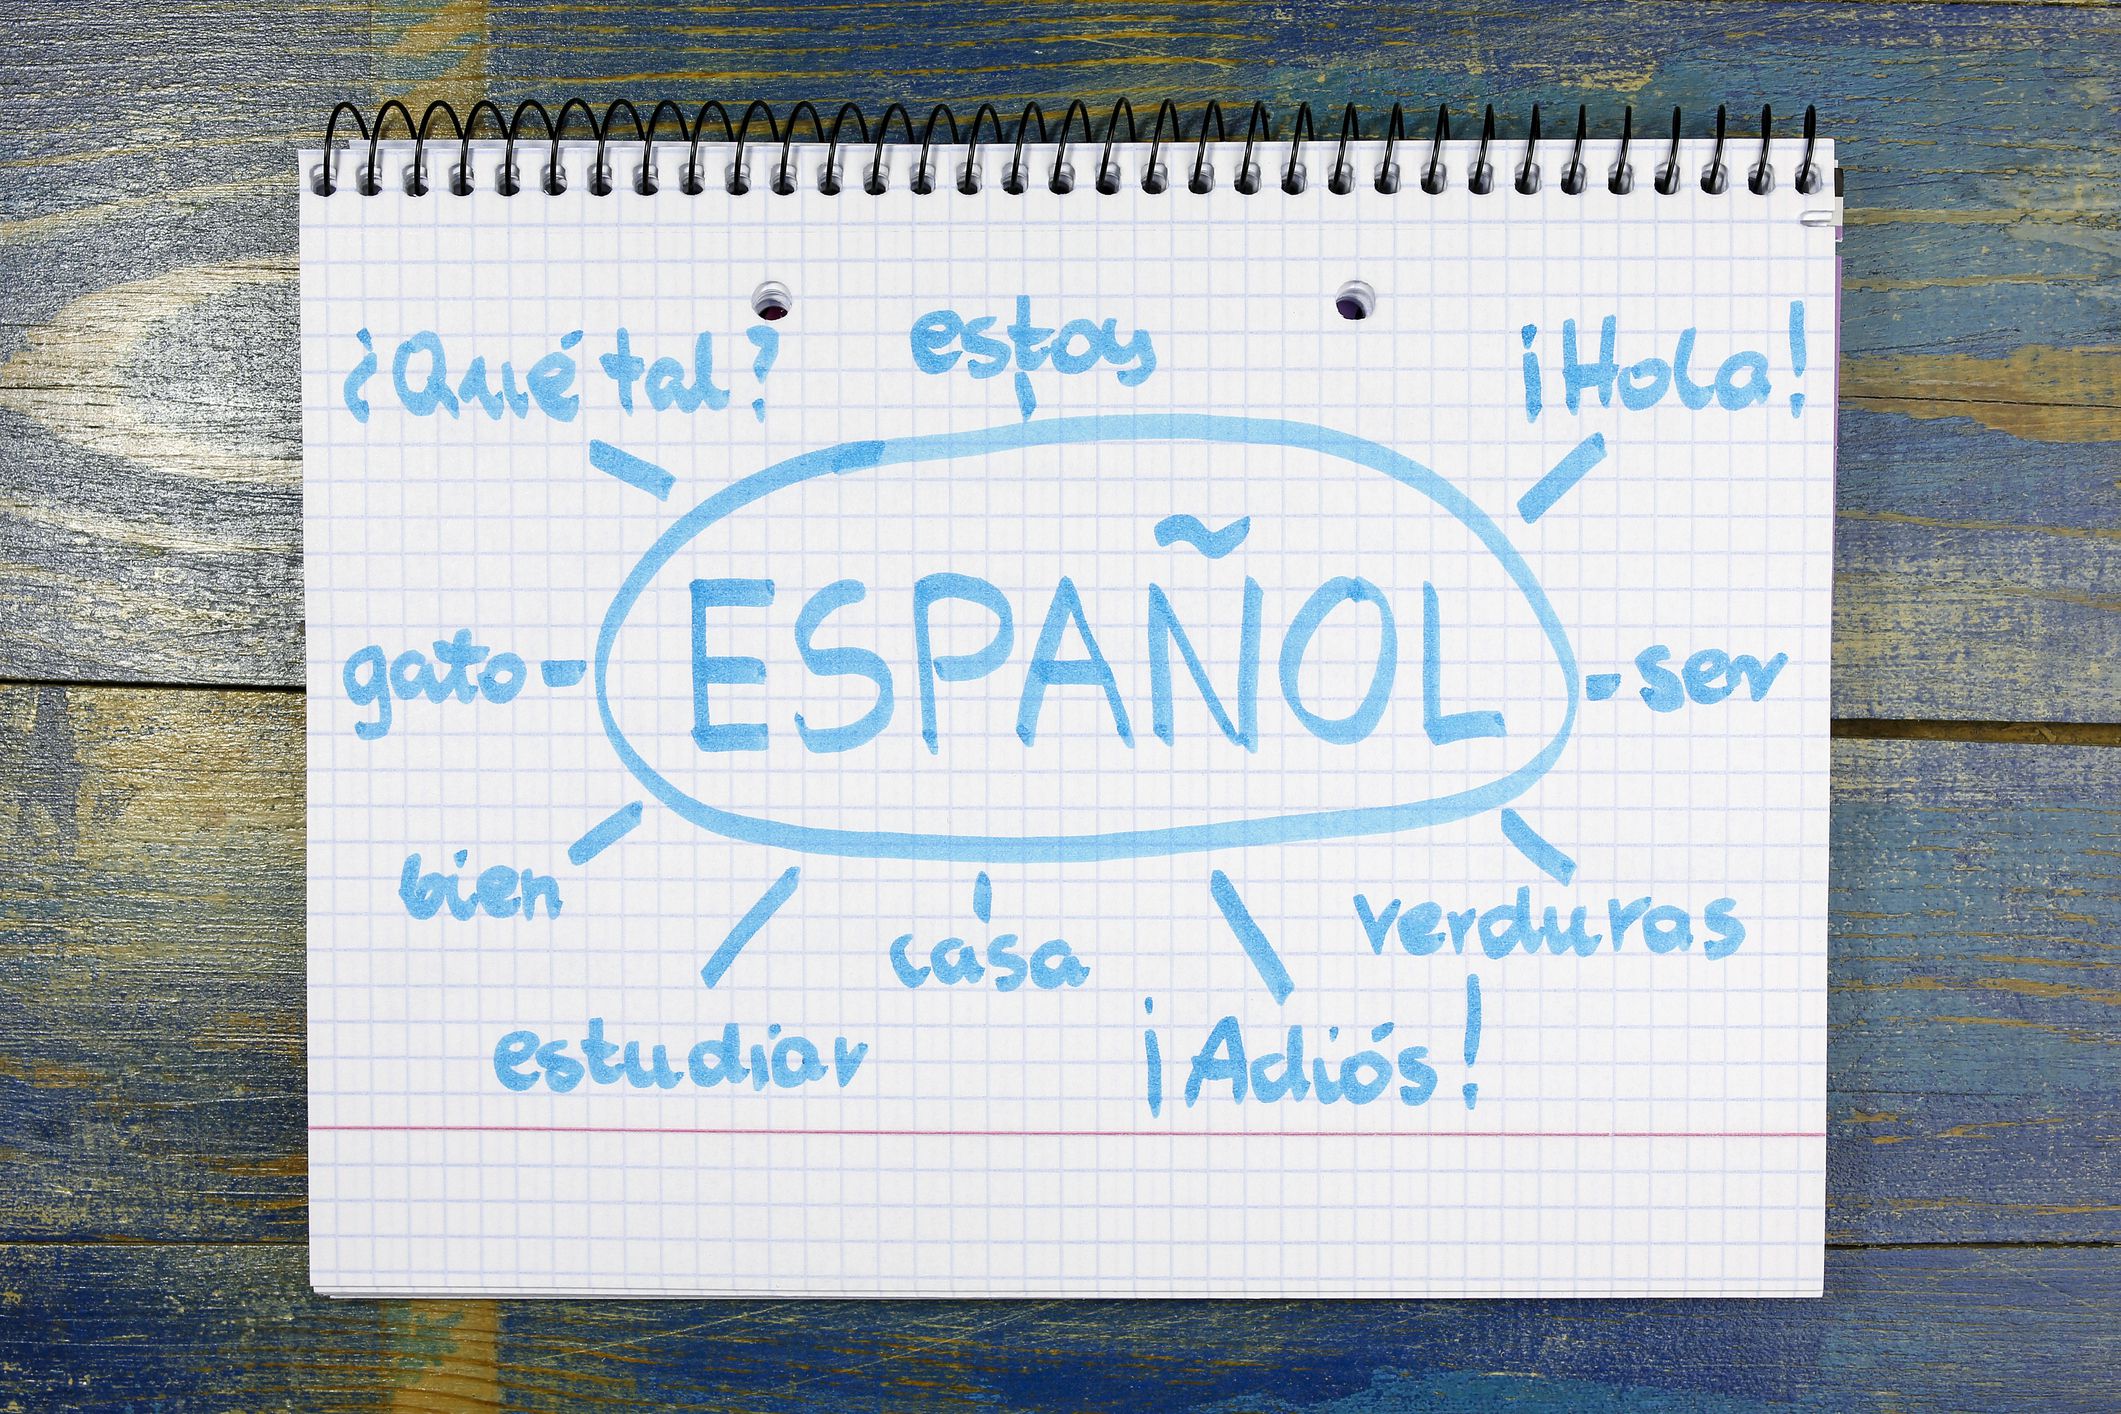 differences between European Spanish and Latin American Spanish